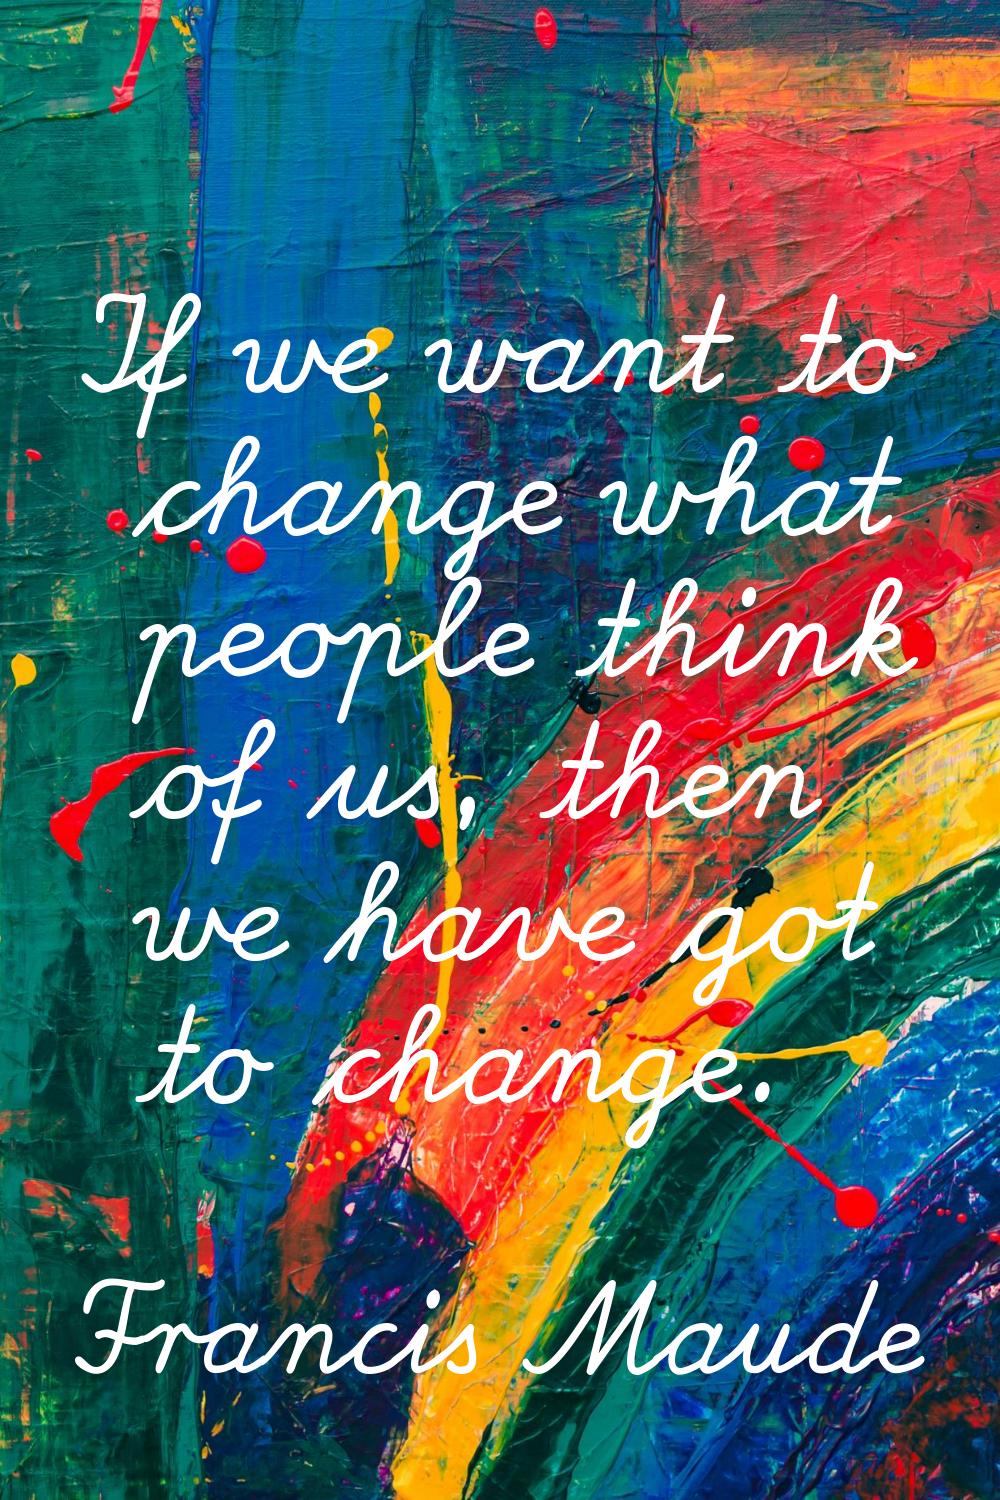 If we want to change what people think of us, then we have got to change.